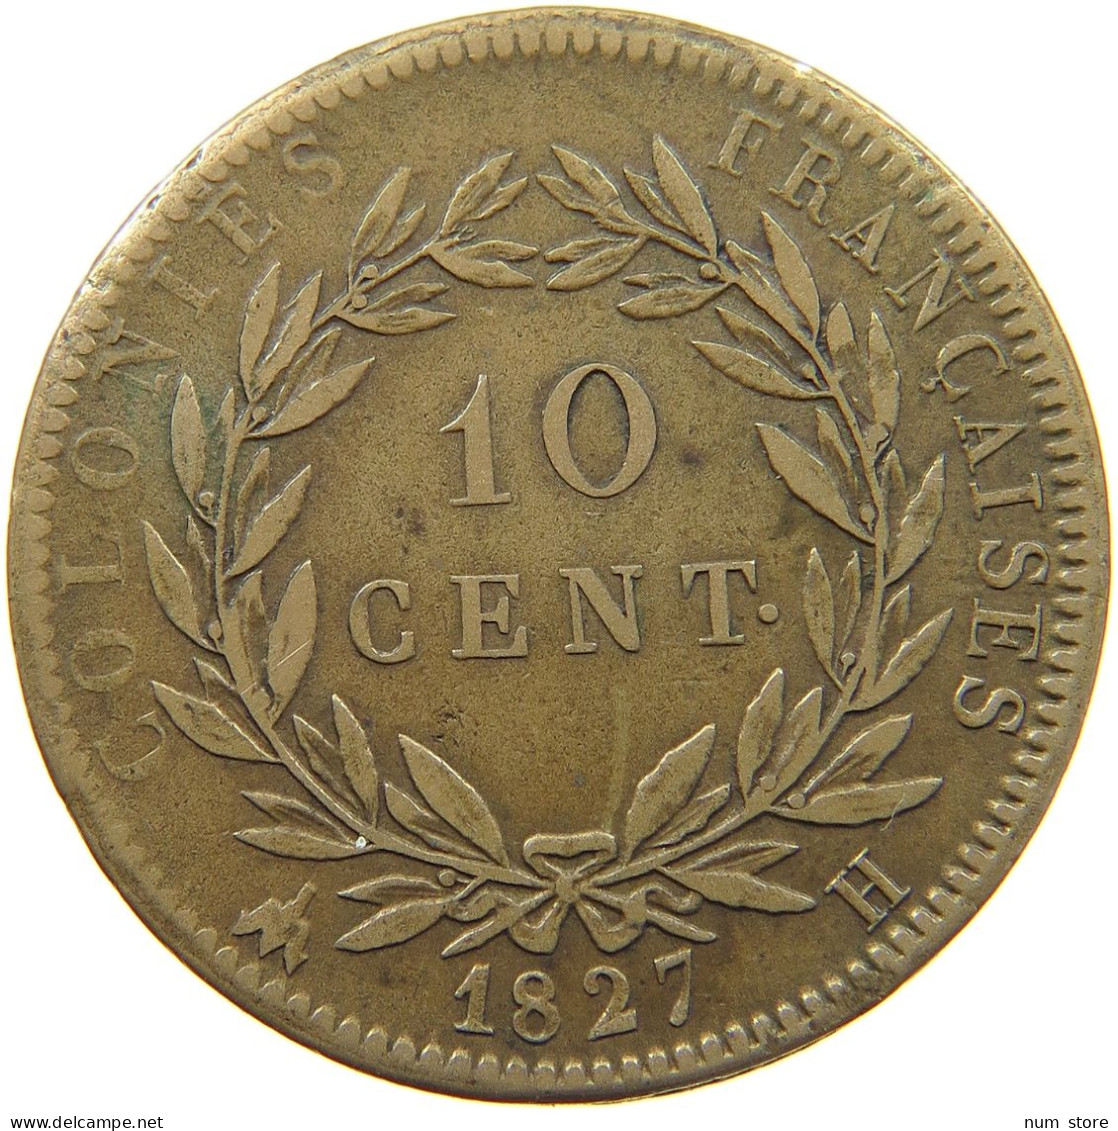 FRANCE COLONIES 10 CENTIMES 1827 H Charles X. (1824-1830) #t120 0397 - French Colonies (1817-1844)